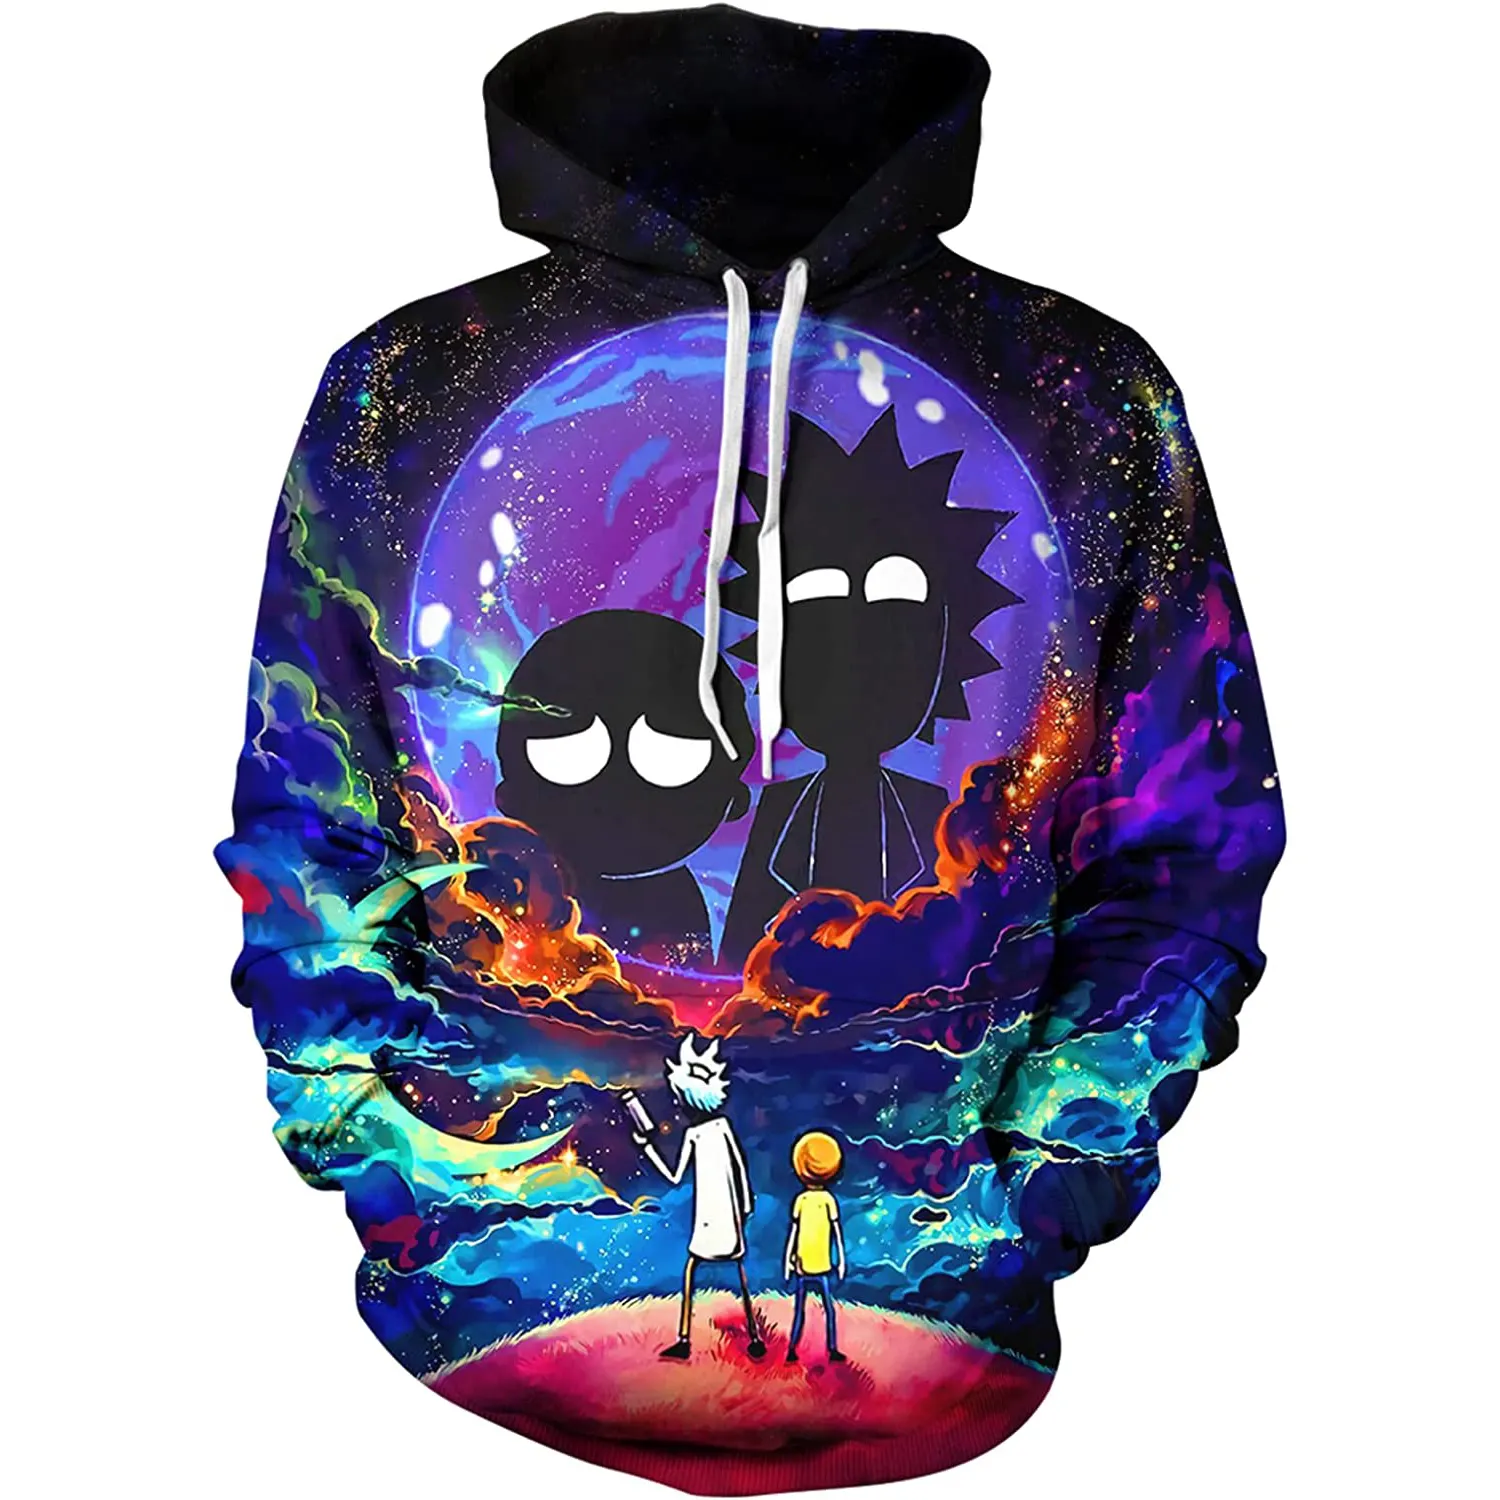 Fitspi Wholesale Youth Adults Novtly Hoodie 3d Printed Cool Hoodie Unisex Street Fashion Pullover Sweatshirt Supplier China